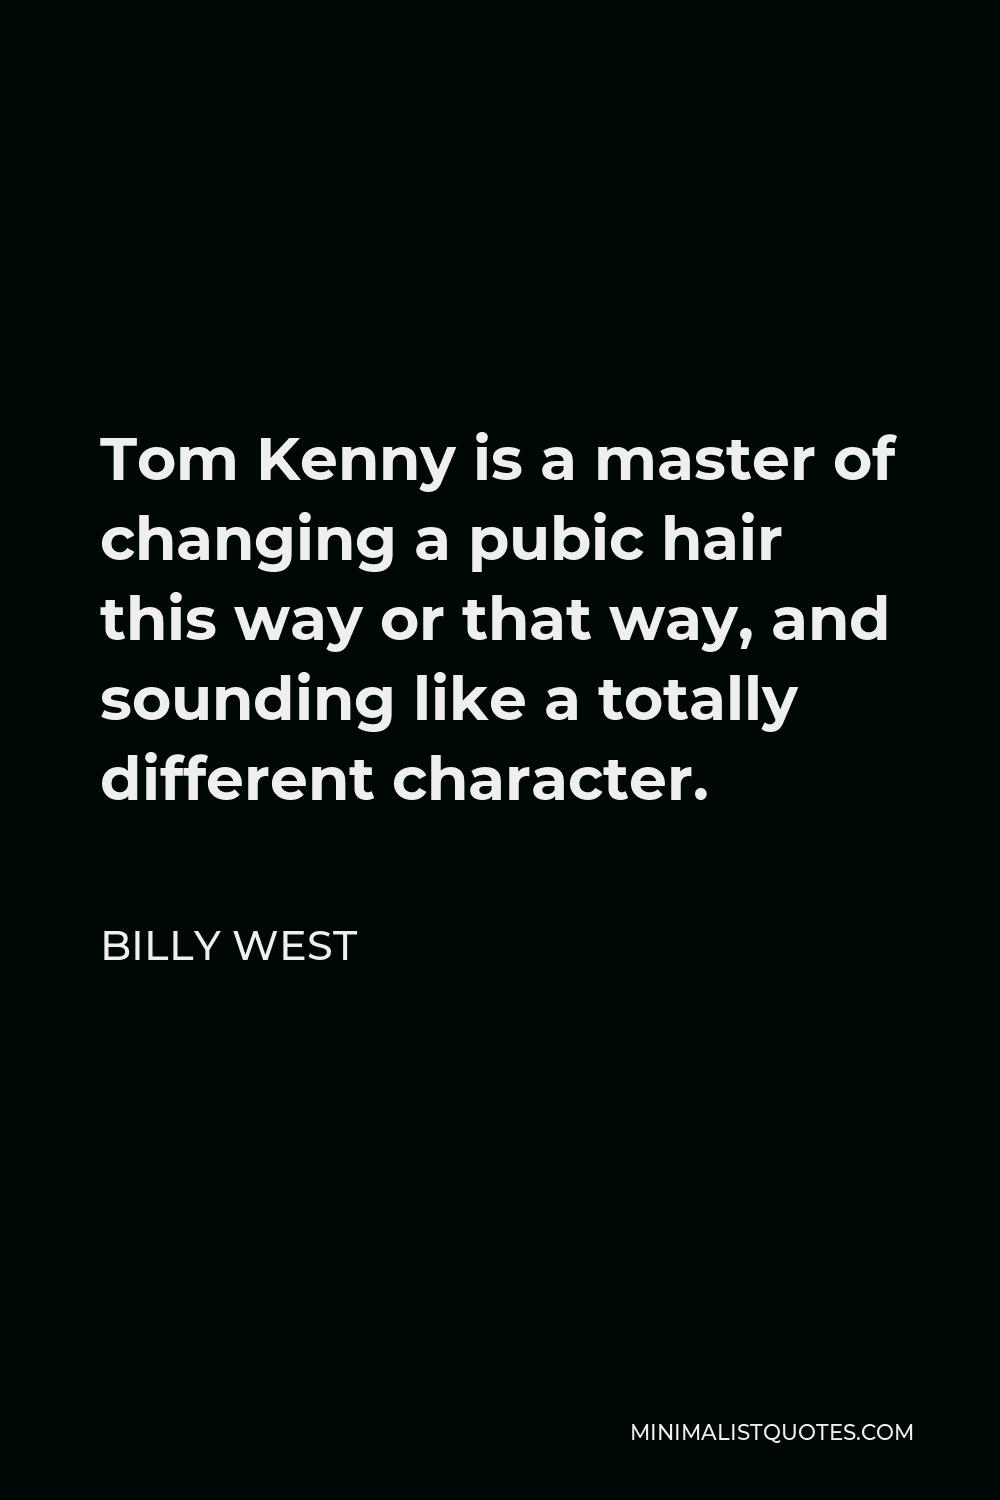 Billy West Quote - Tom Kenny is a master of changing a pubic hair this way or that way, and sounding like a totally different character.